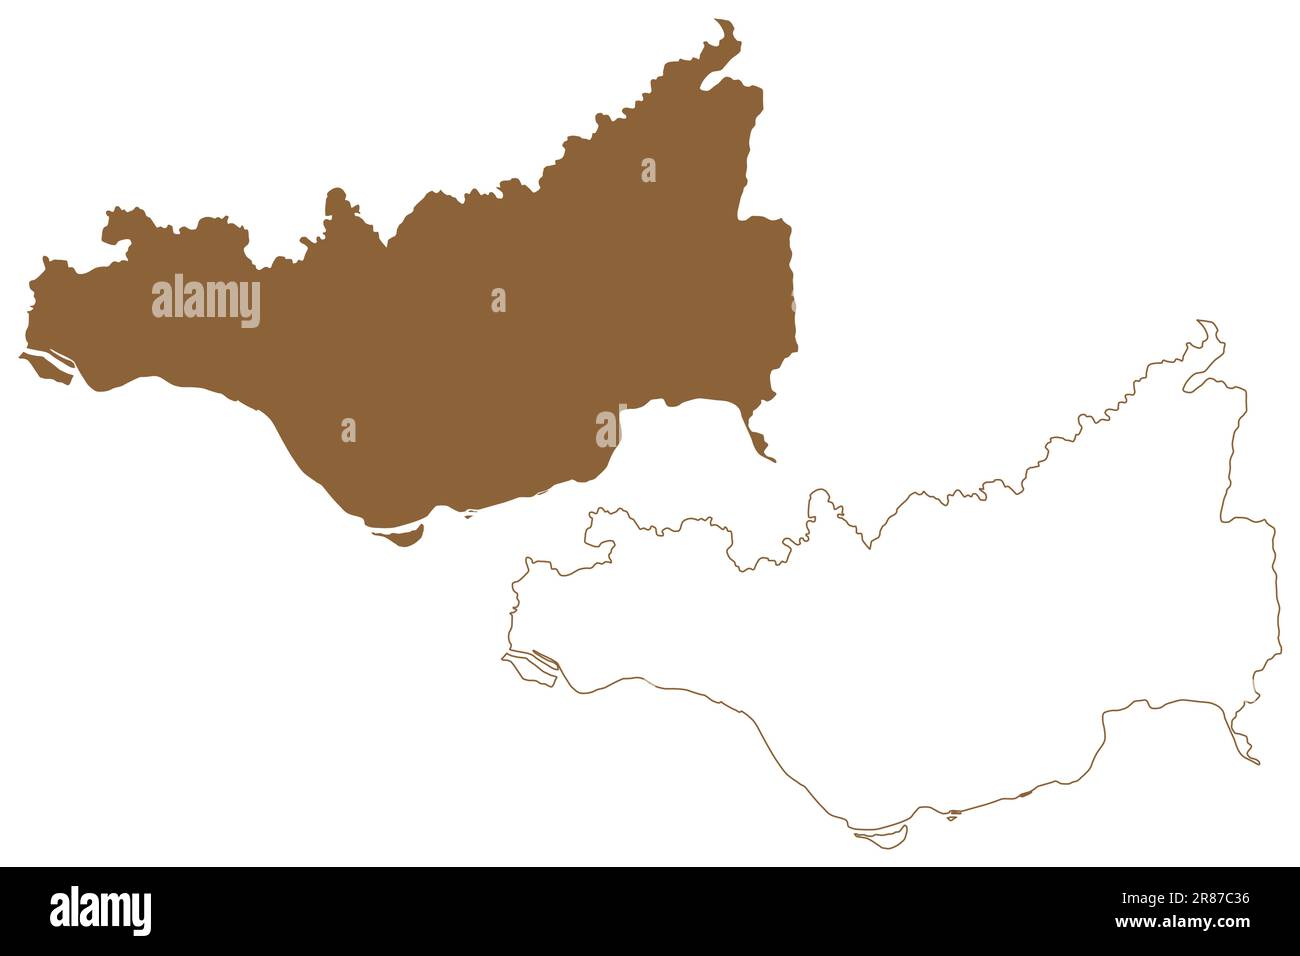 Perg district (Republic of Austria or Österreich, Upper Austria or Oberösterreich state) map vector illustration, scribble sketch Bezirk Perg map Stock Vector